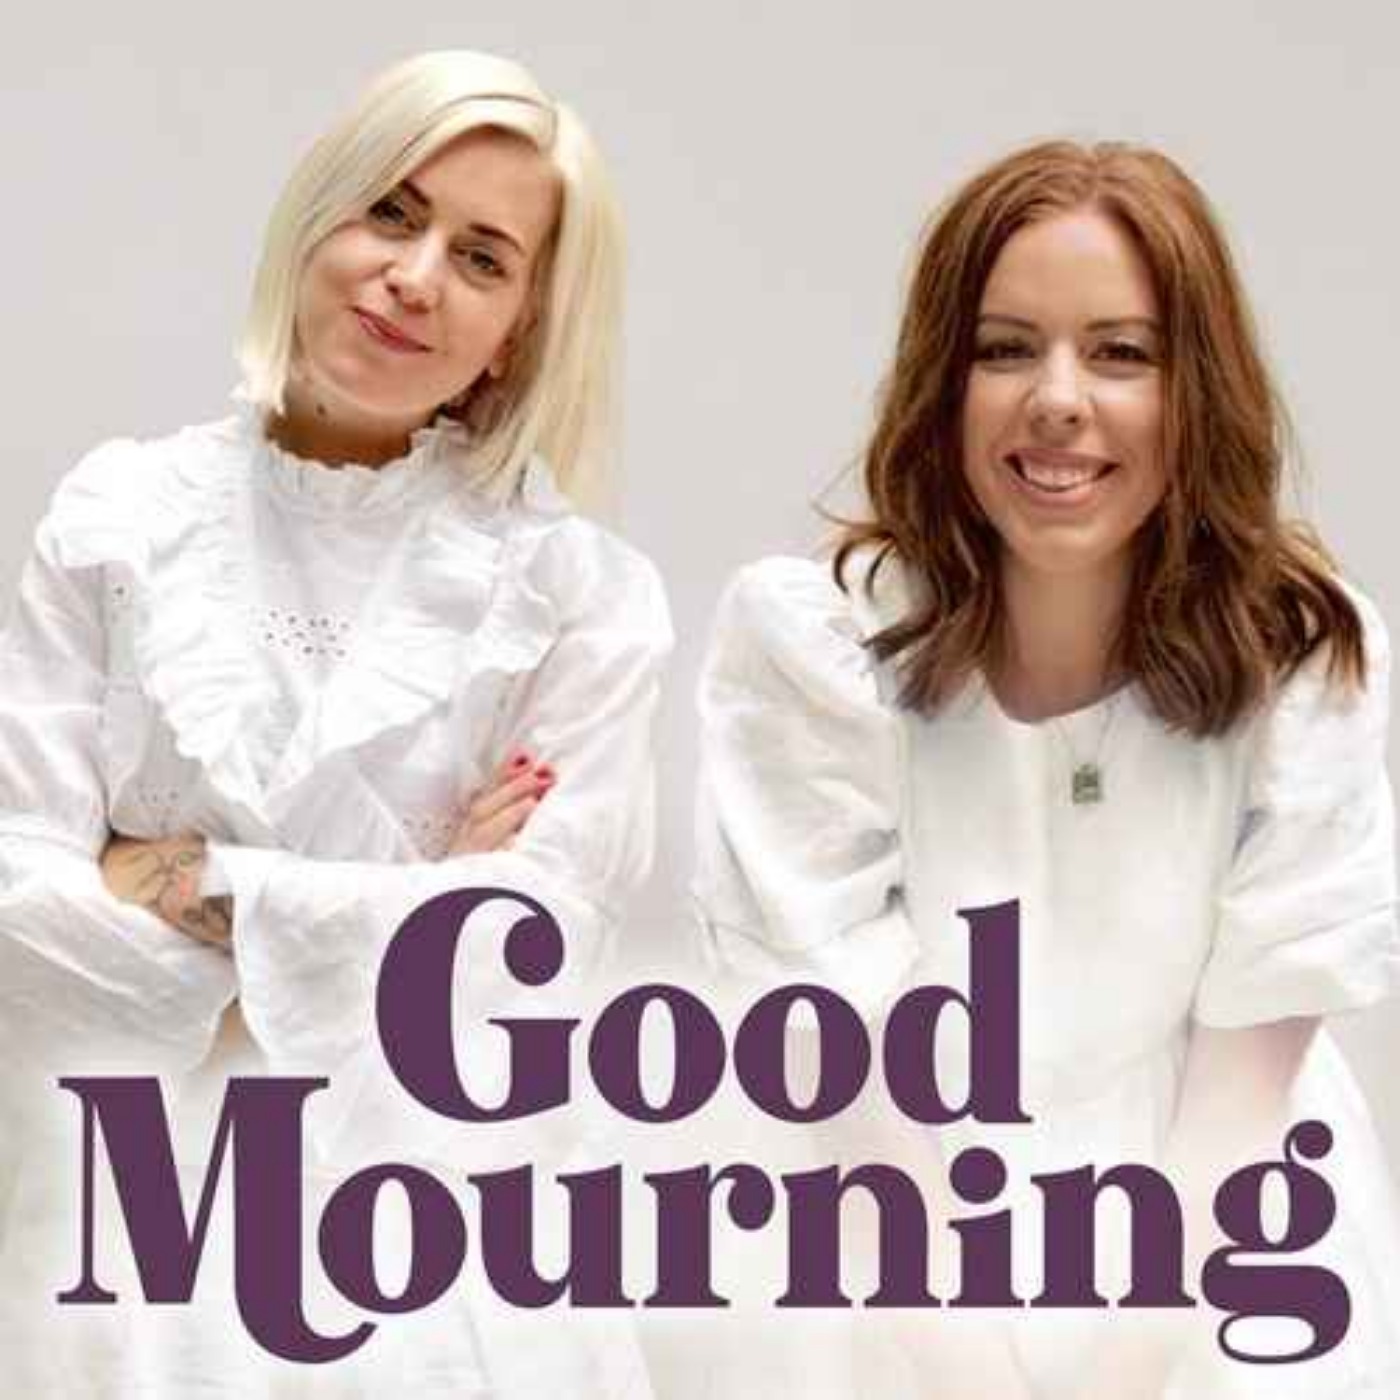 Getting Real About Grief with Cariad Lloyd